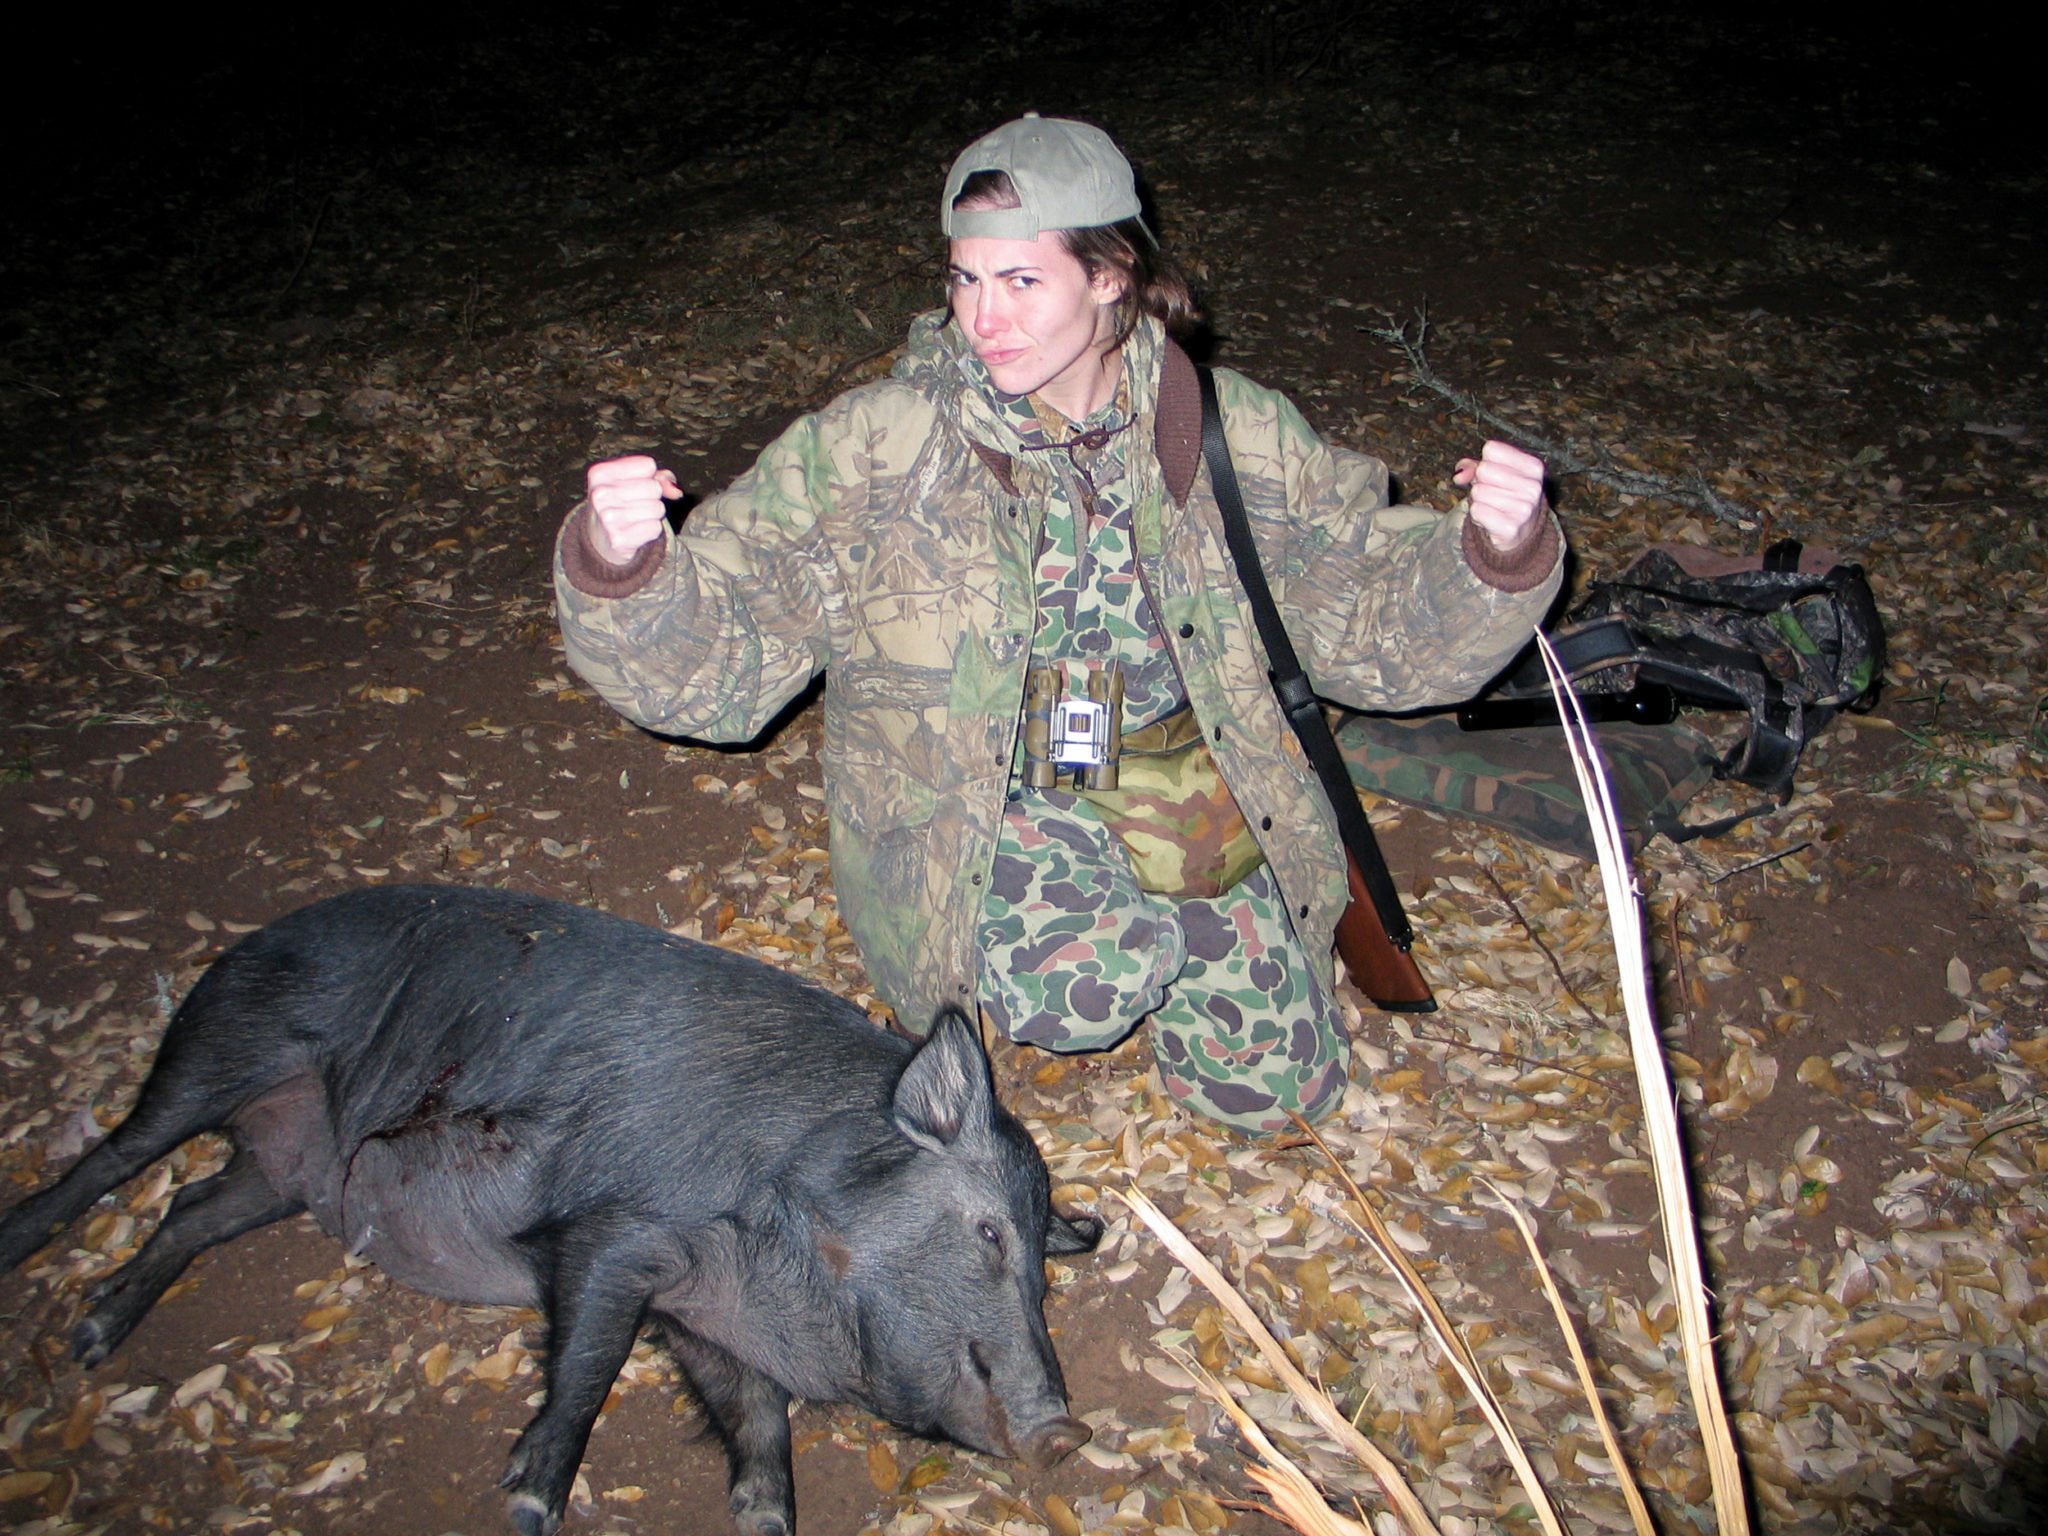 The Feral Hog Battle is Big Business in Texas